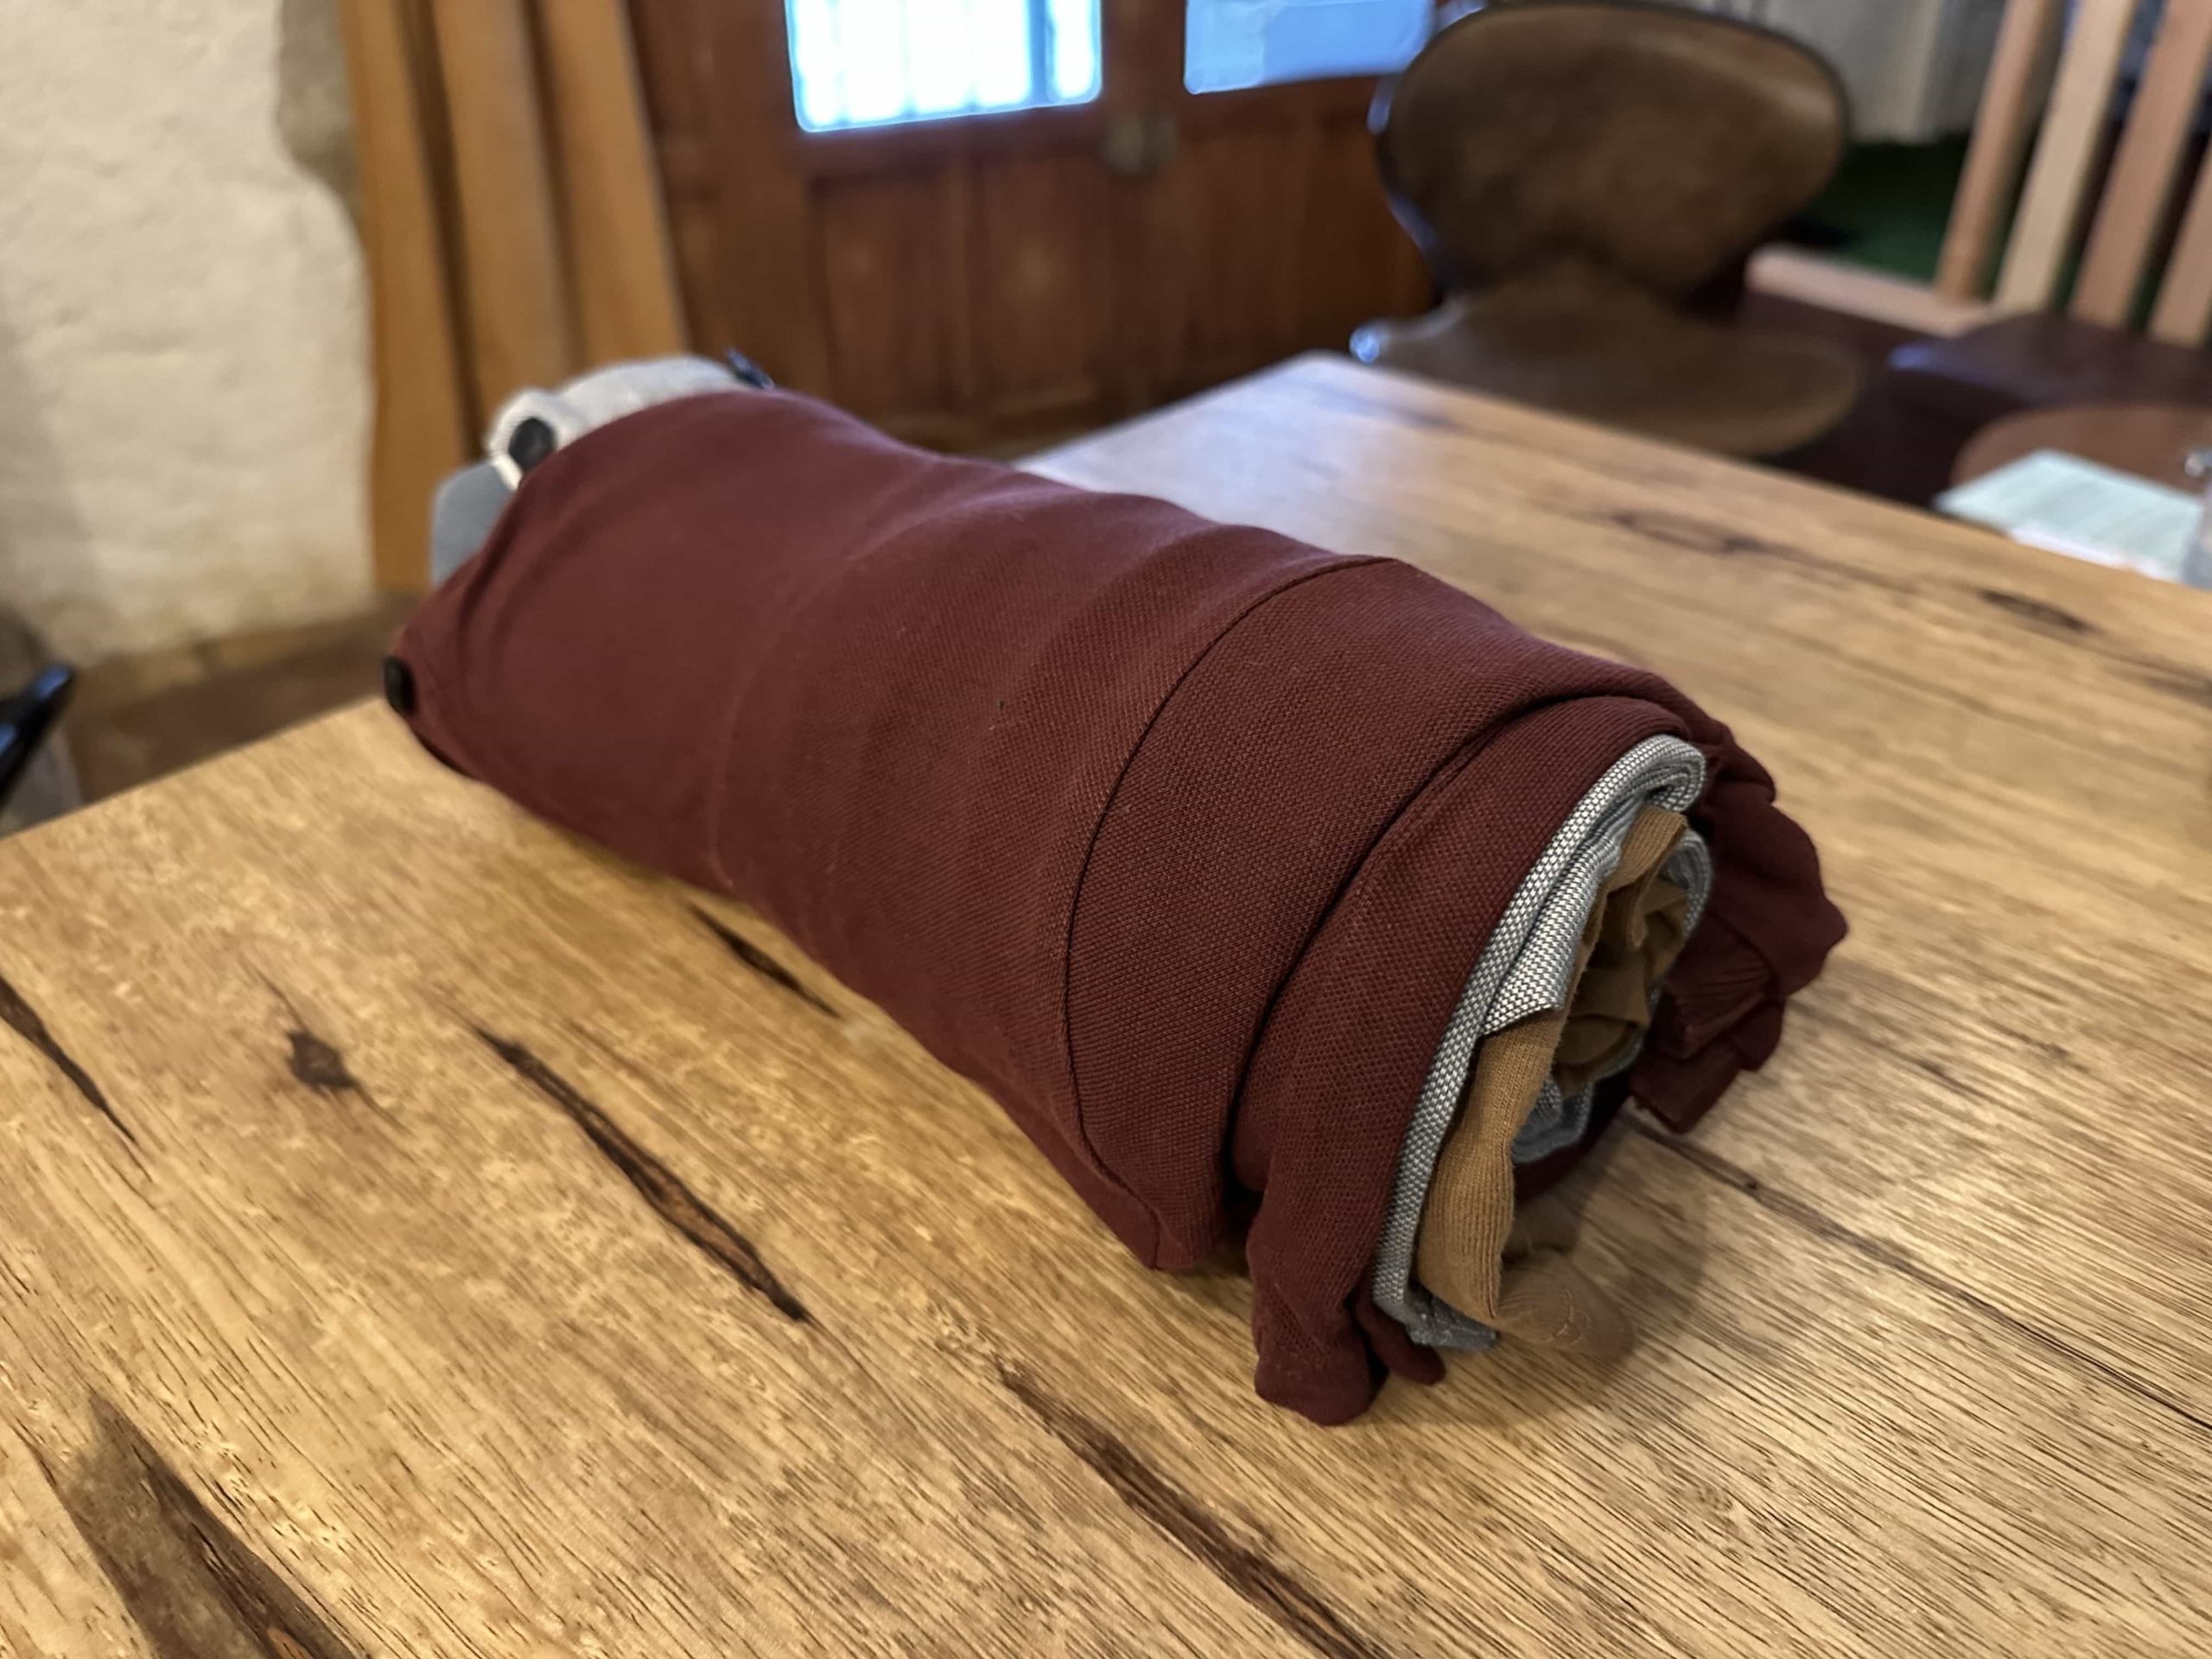 Multiple items of clothing rolled together into a tube